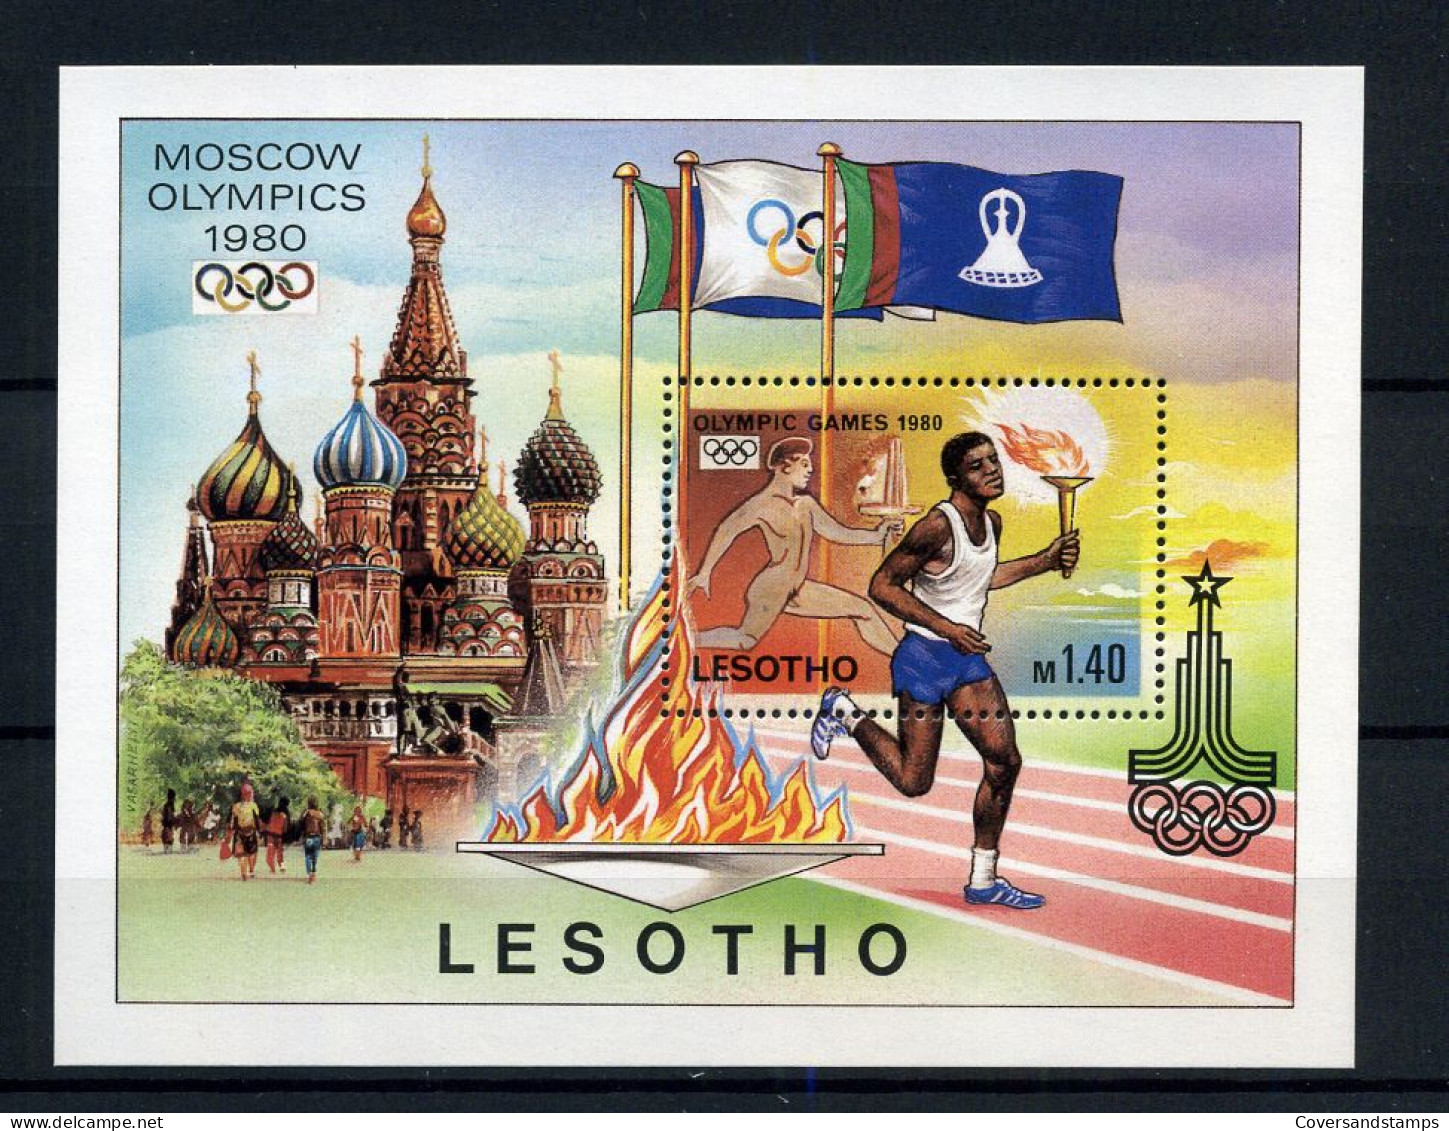 Lesotho - Moscow Olympics 1980 - Ete 1980: Moscou